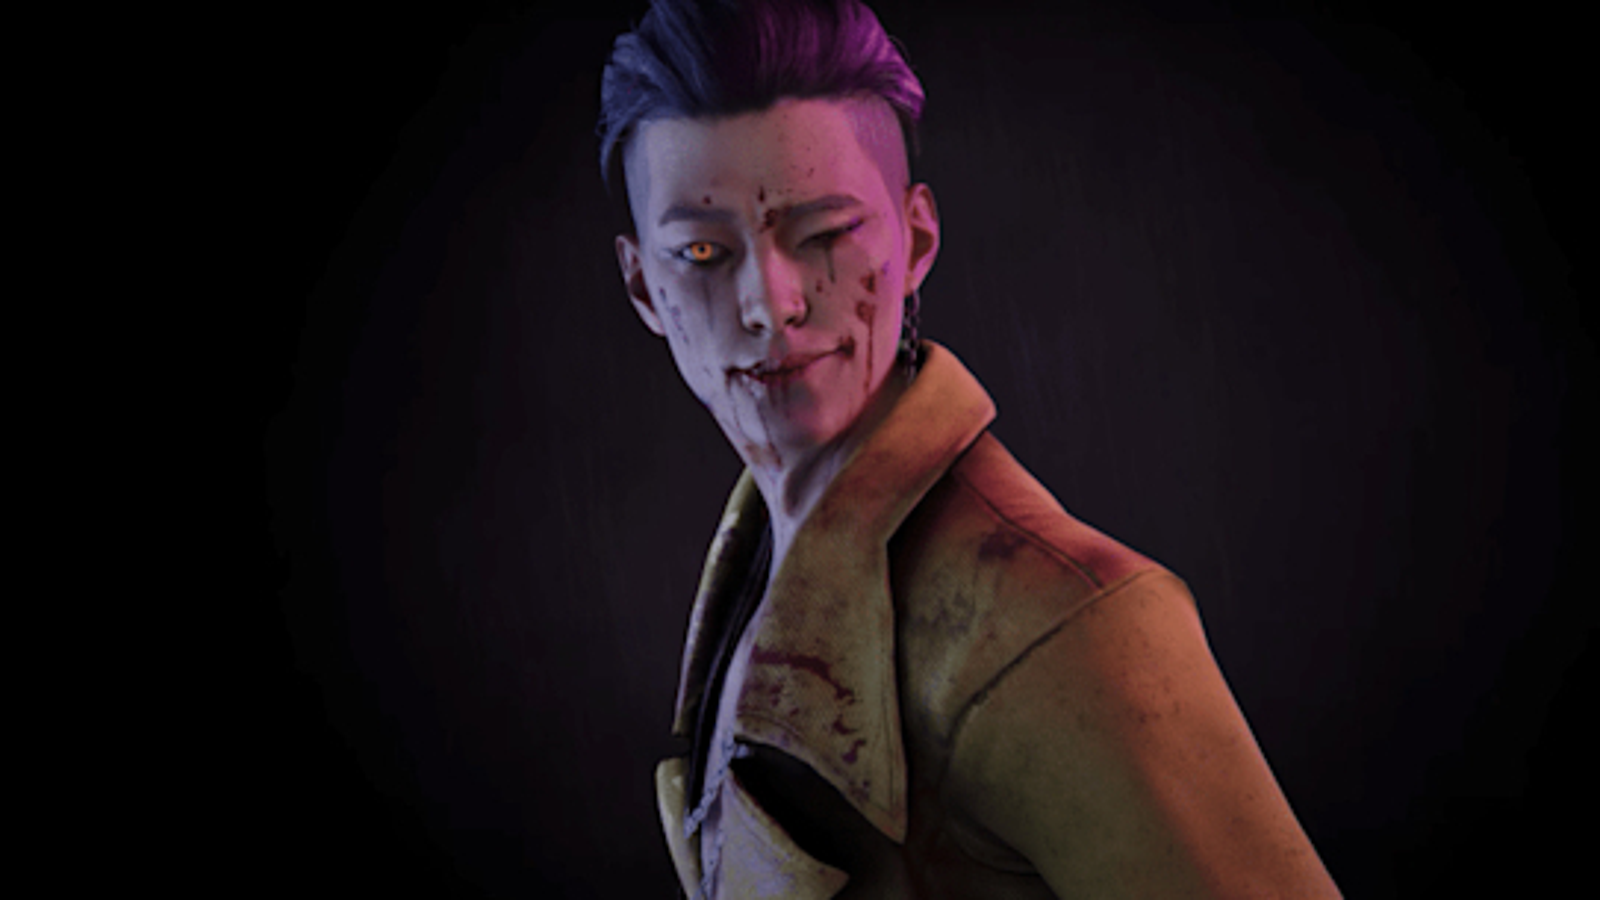 Hooked On You: A Dead By Daylight Dating Sim just launched on